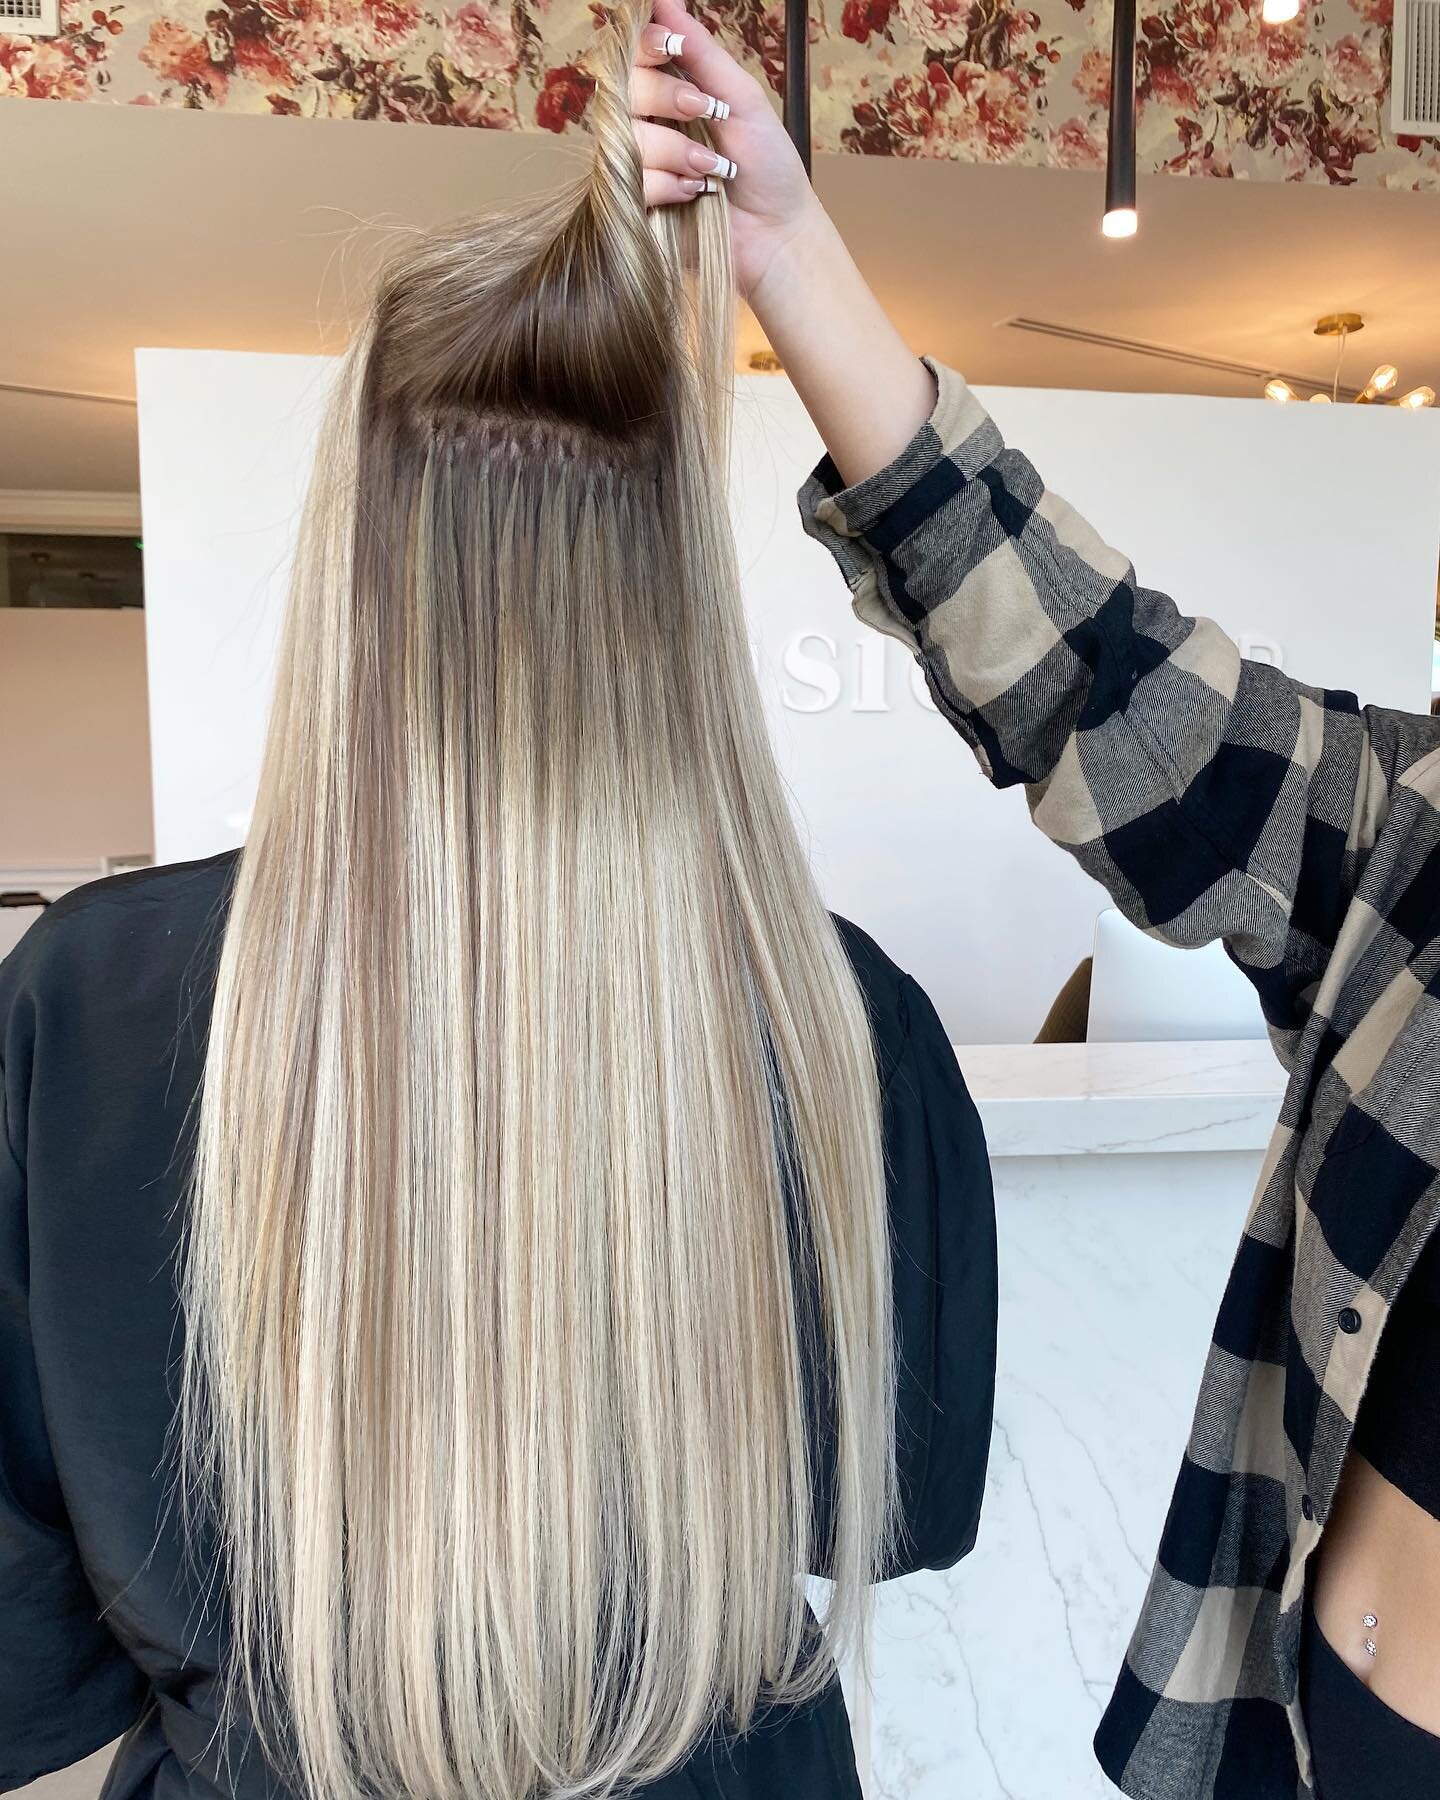 &ldquo;But what do they look like&rdquo; they ask &hellip; here&rsquo;s how 🤩 seemless ⁣
⁣
Extension install by @taylor.extensionbar ⁣
⁣
BOOK NOW! 480.231.5572⁣
⁣
#extensionbar #extensionbarAZ